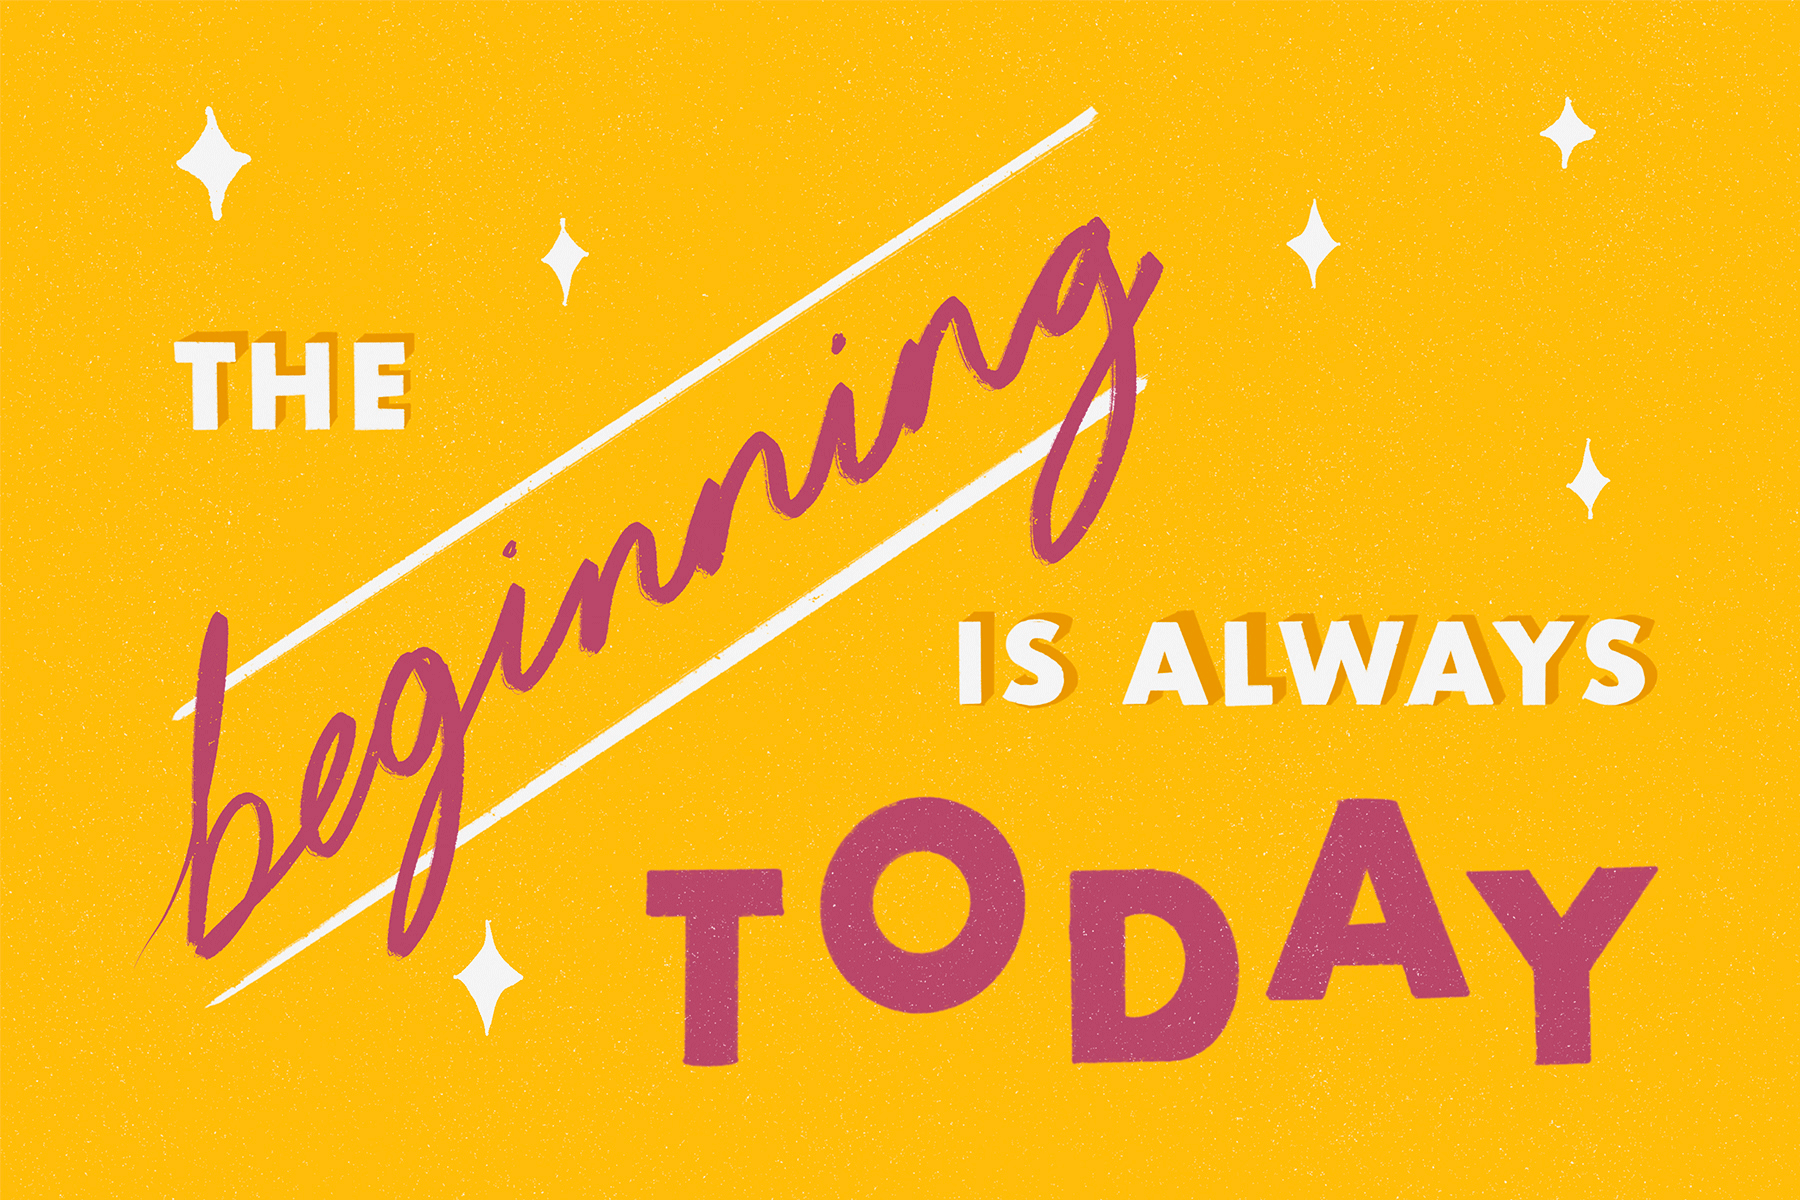 The words 'the beginning is always today' written in pink and white on a yellow background